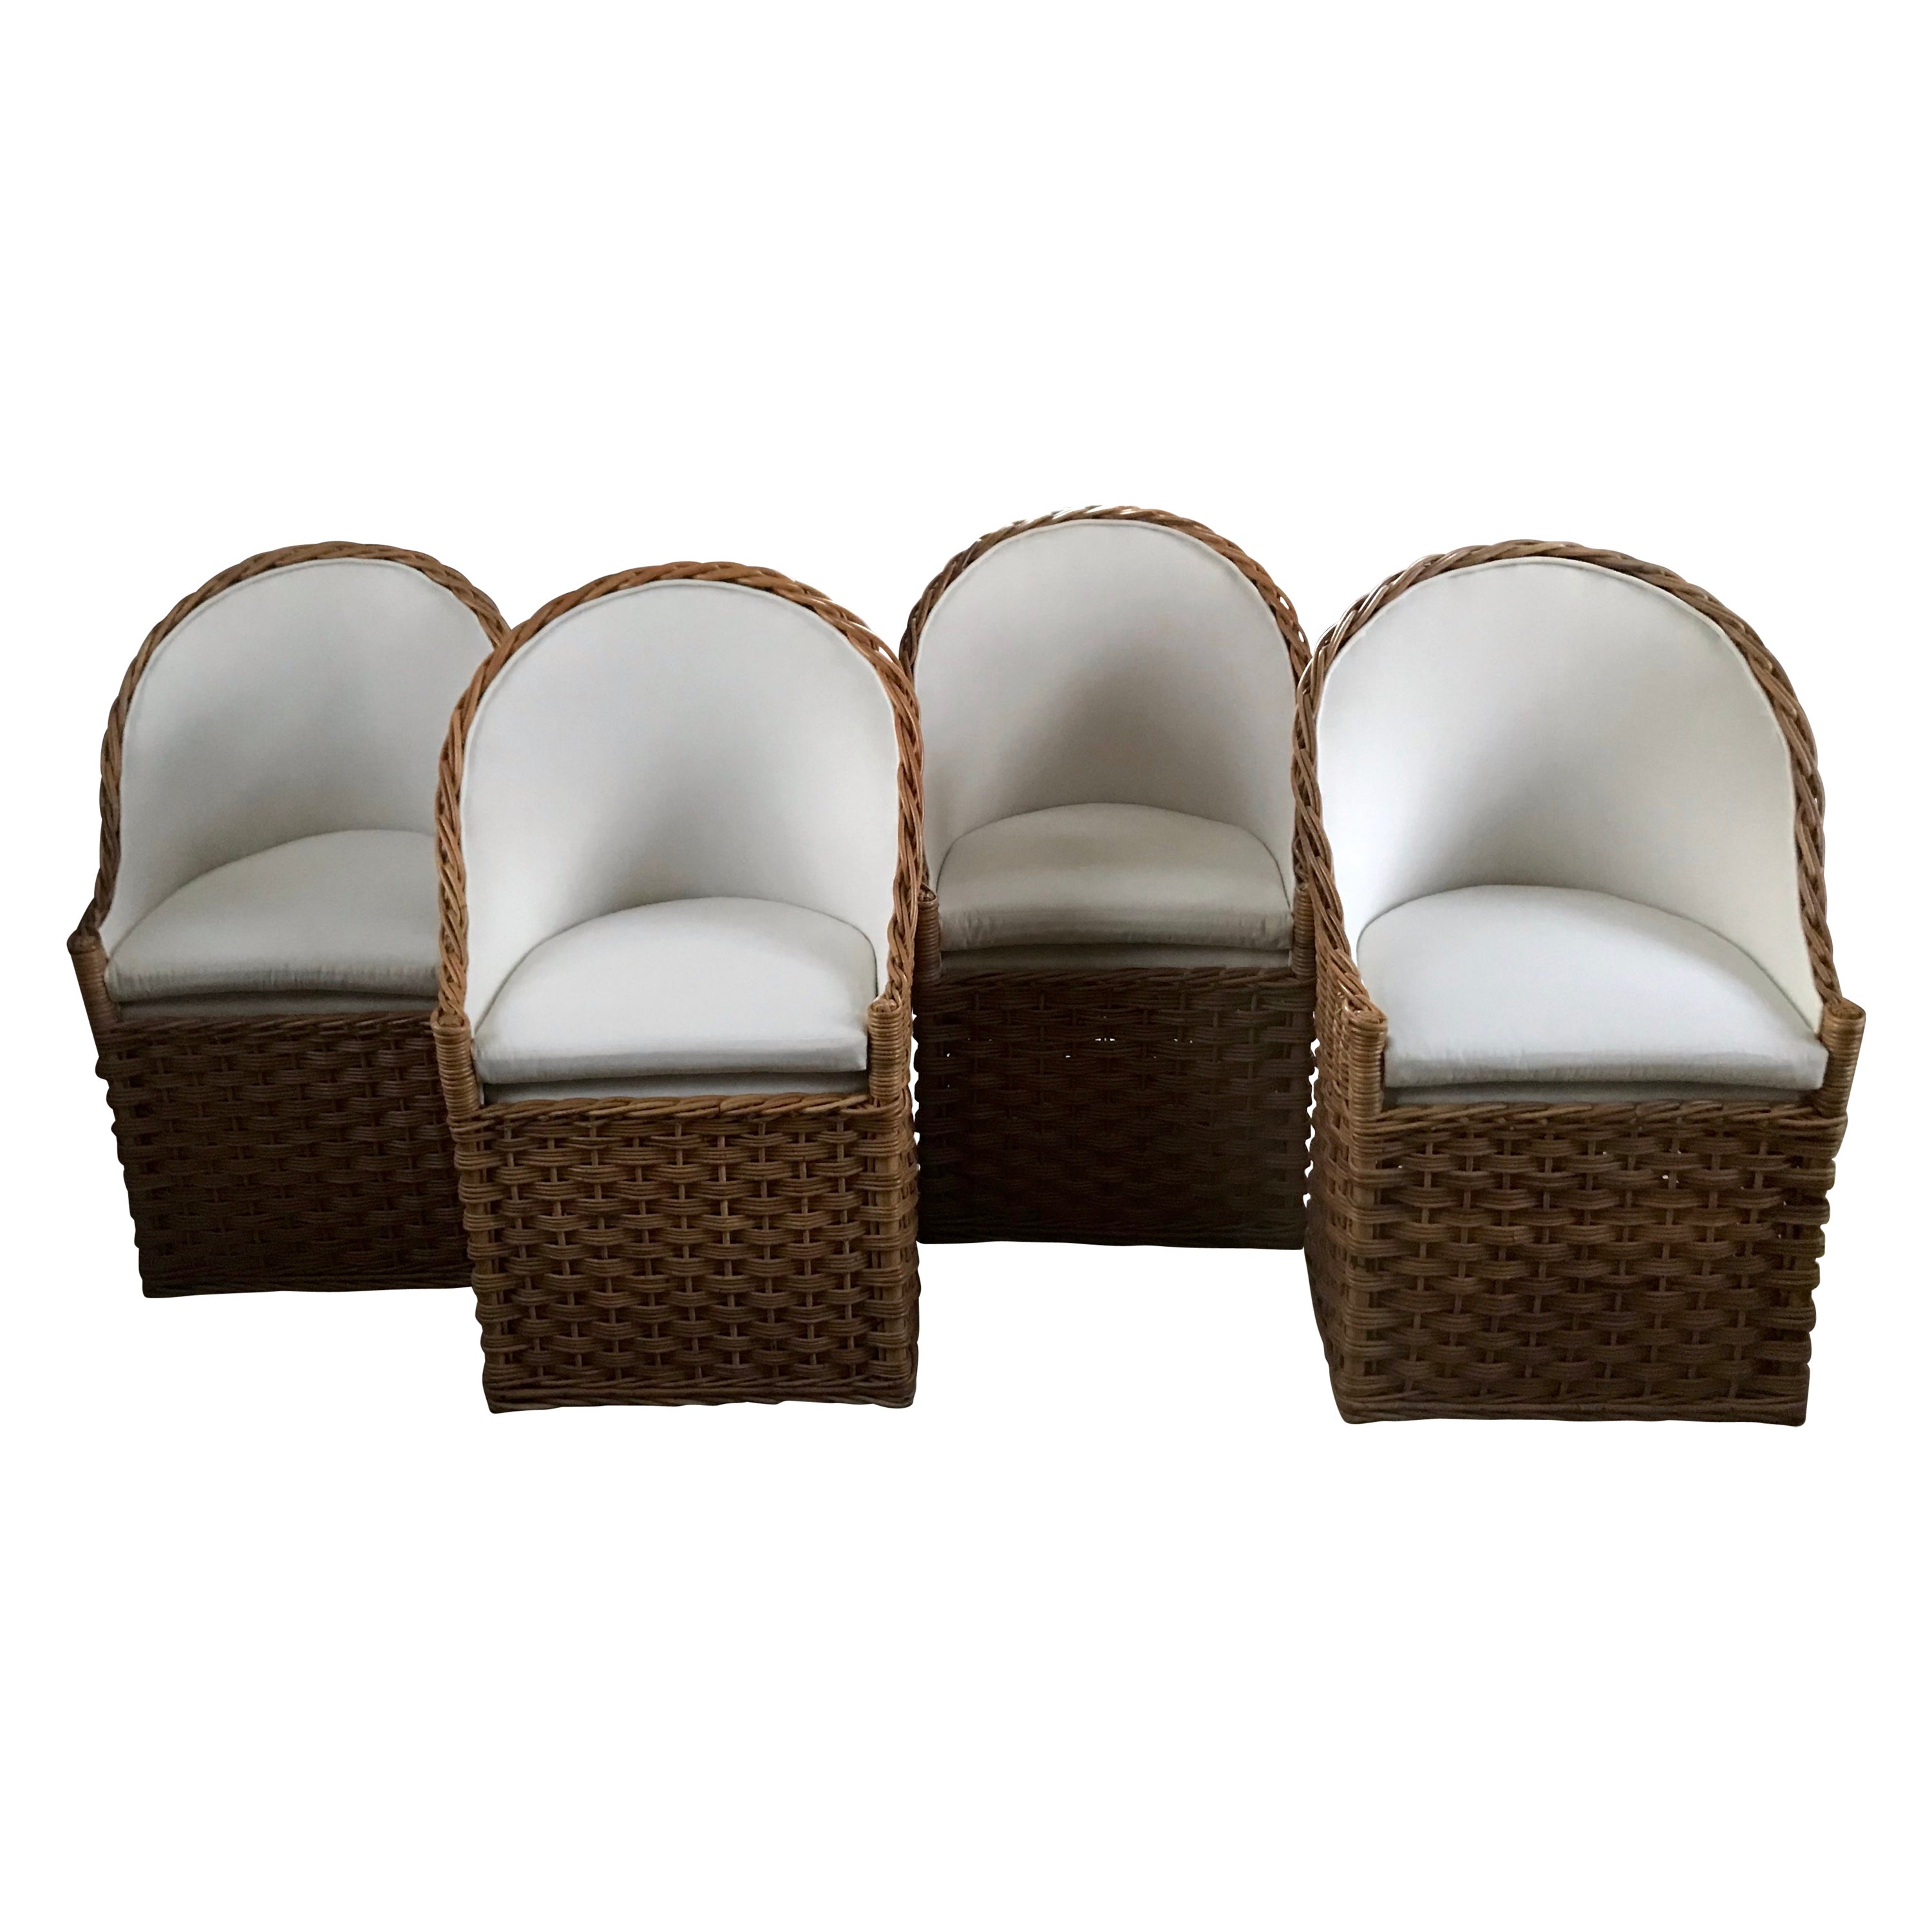 Set of Four Natural Wicker Barrel Back Chairs